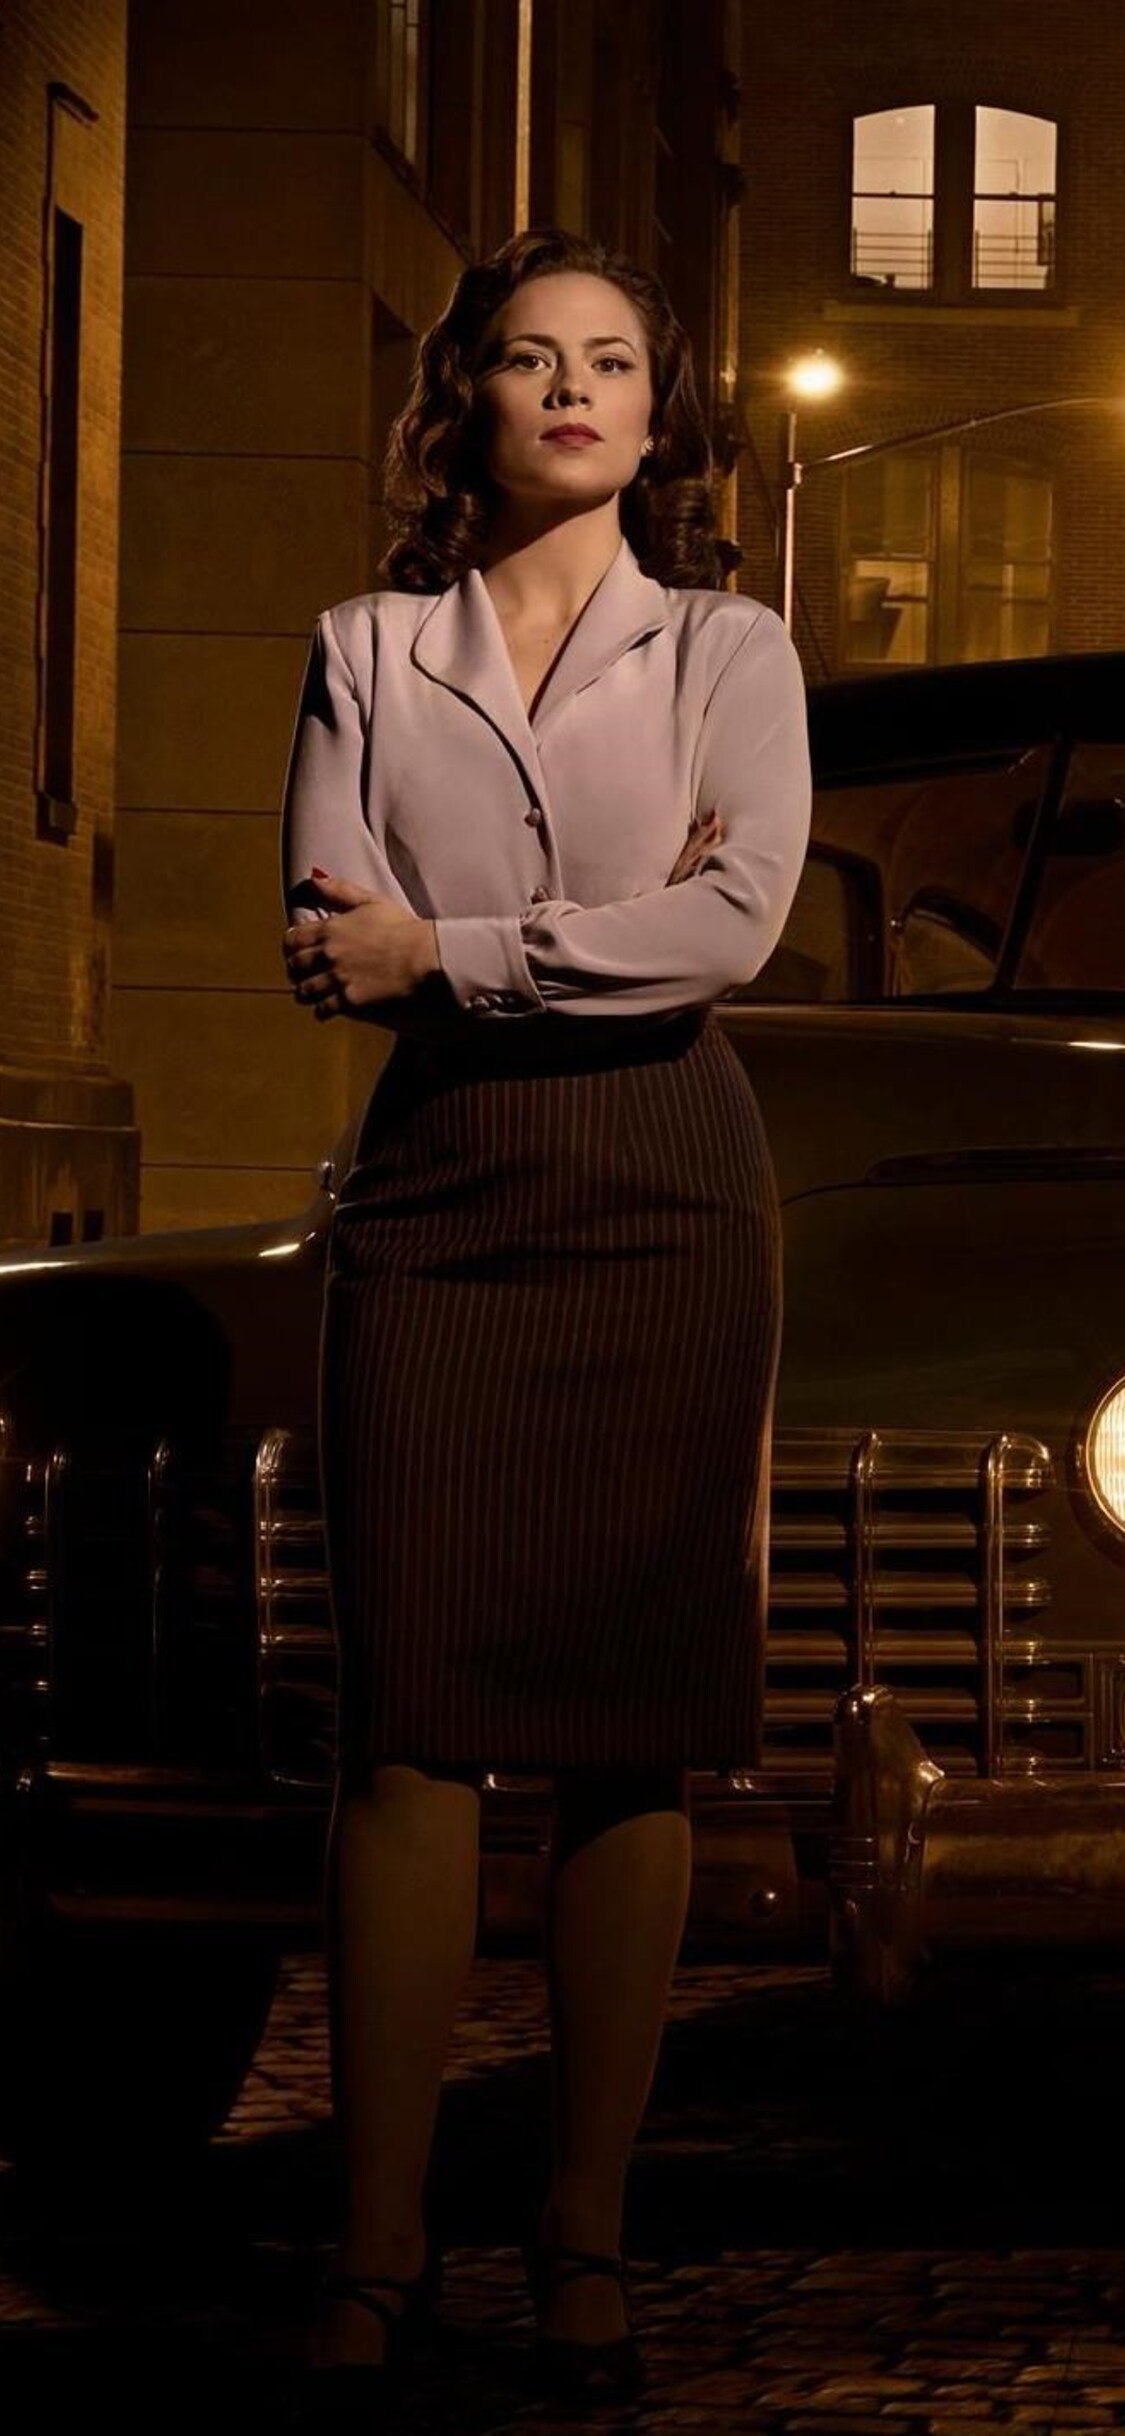 1125x2436 Hayley Atwell As Agent Carter Iphone Xs Iphone 10 Iphone Images, Photos, Reviews